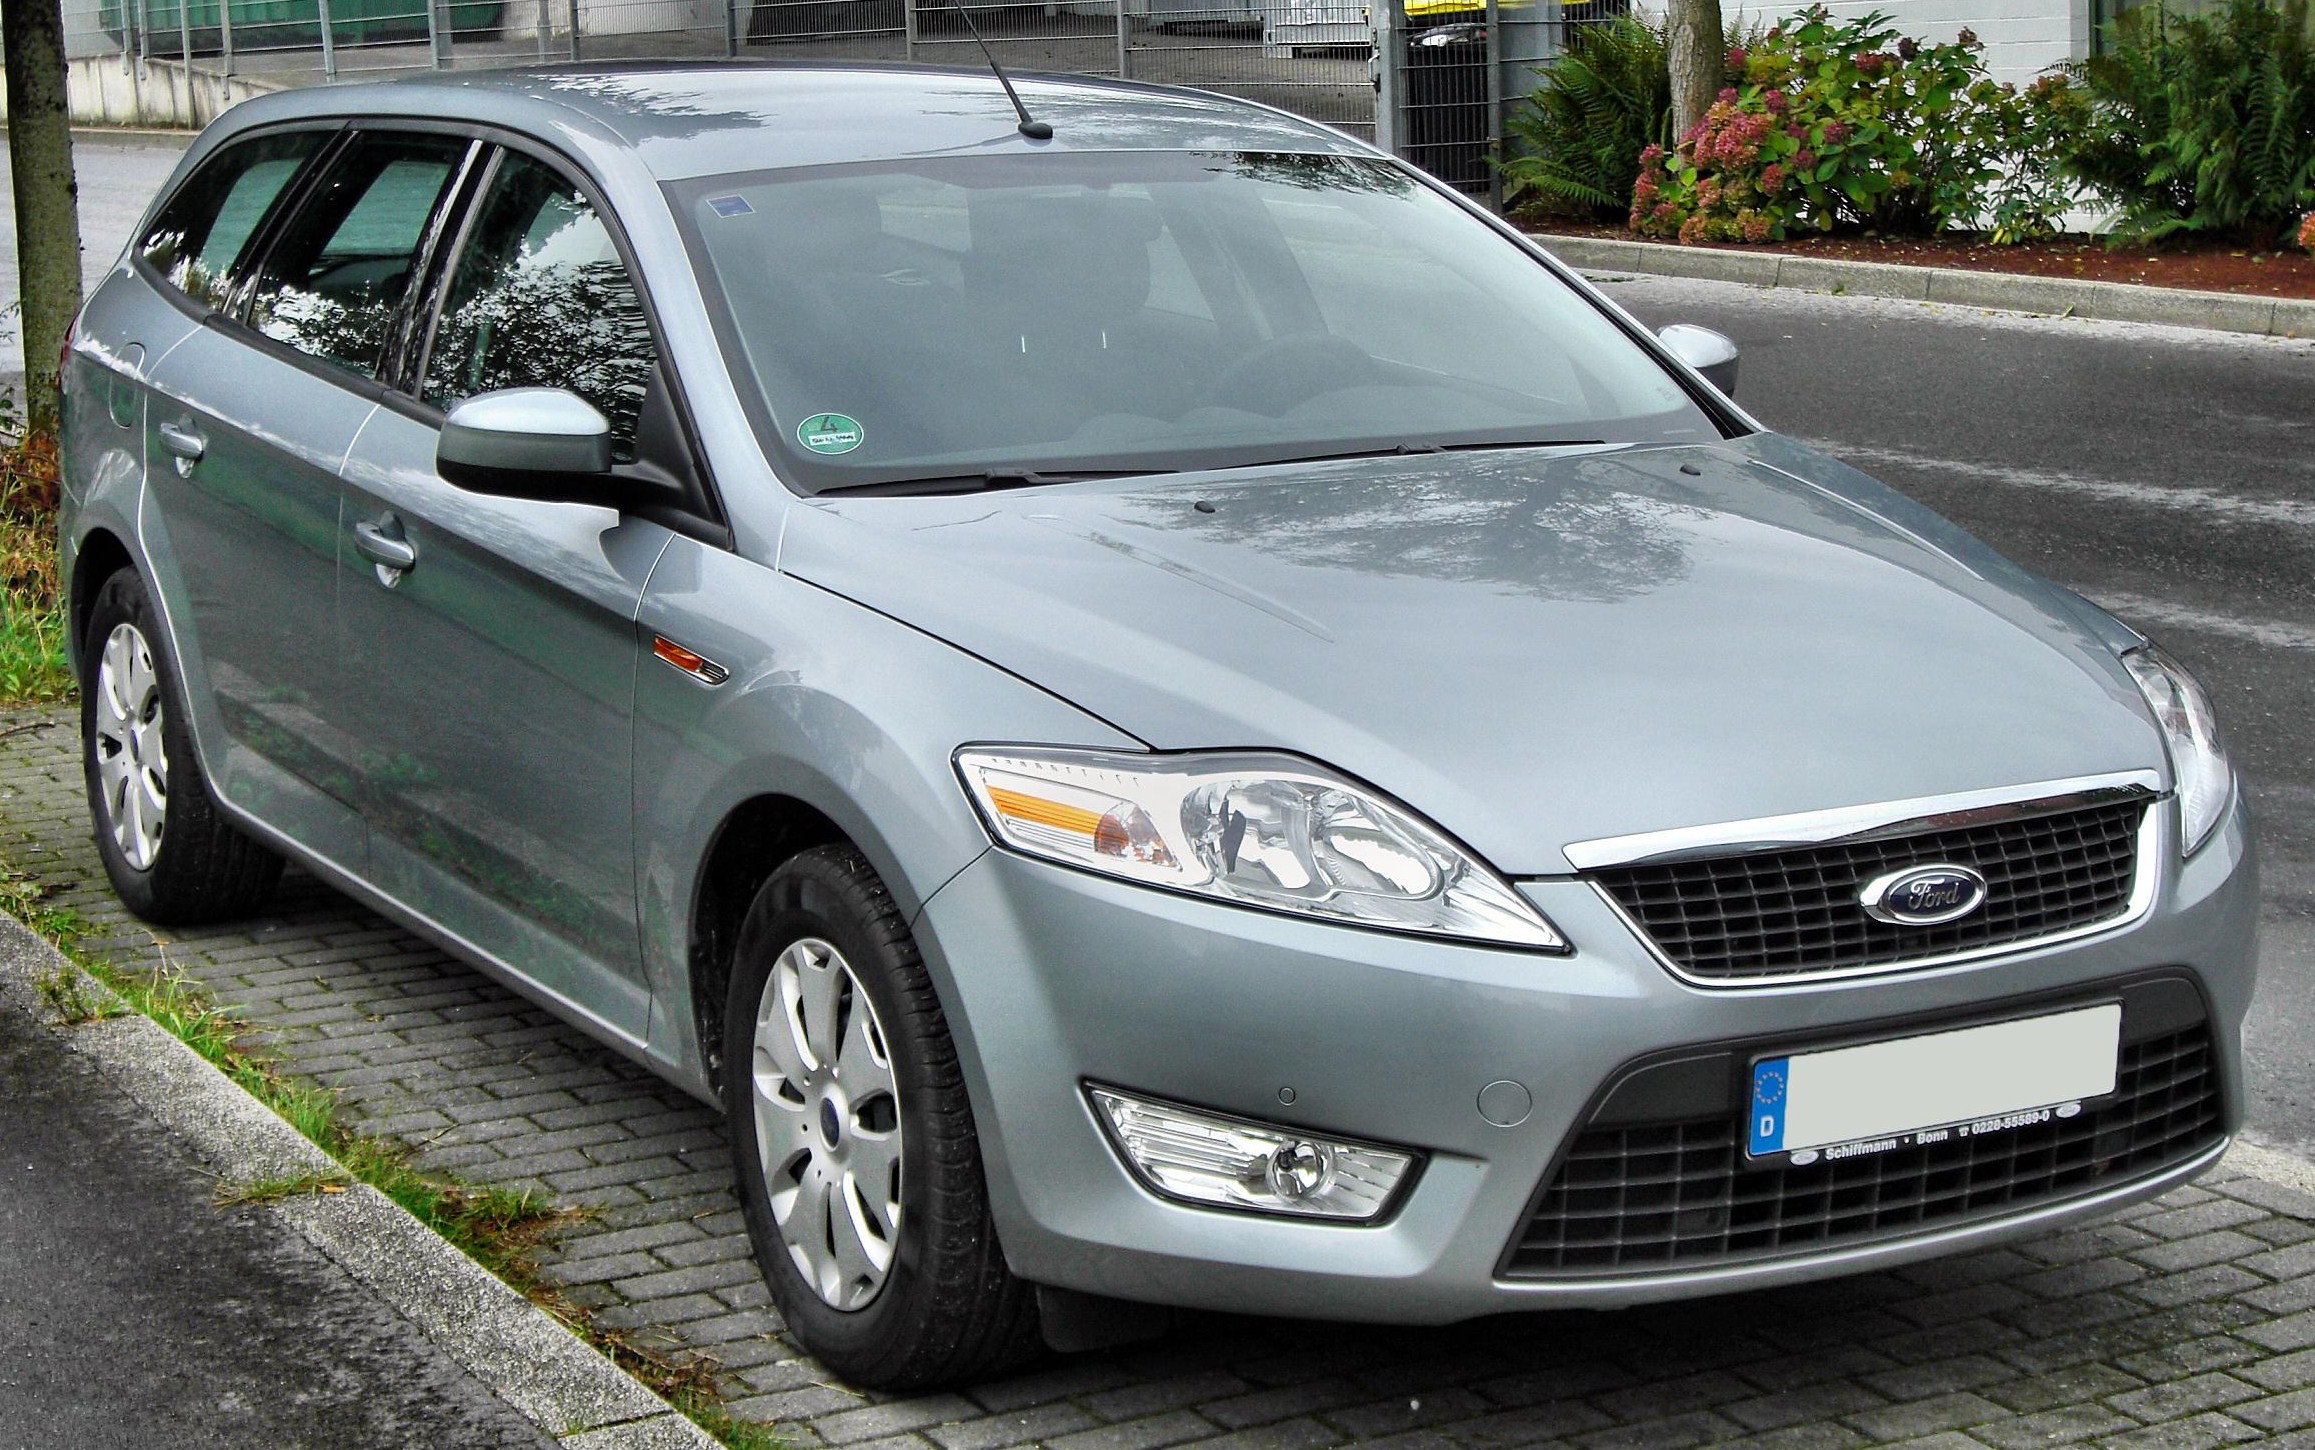 Used Ford Mondeo Cars for Sale | Motors.co.uk